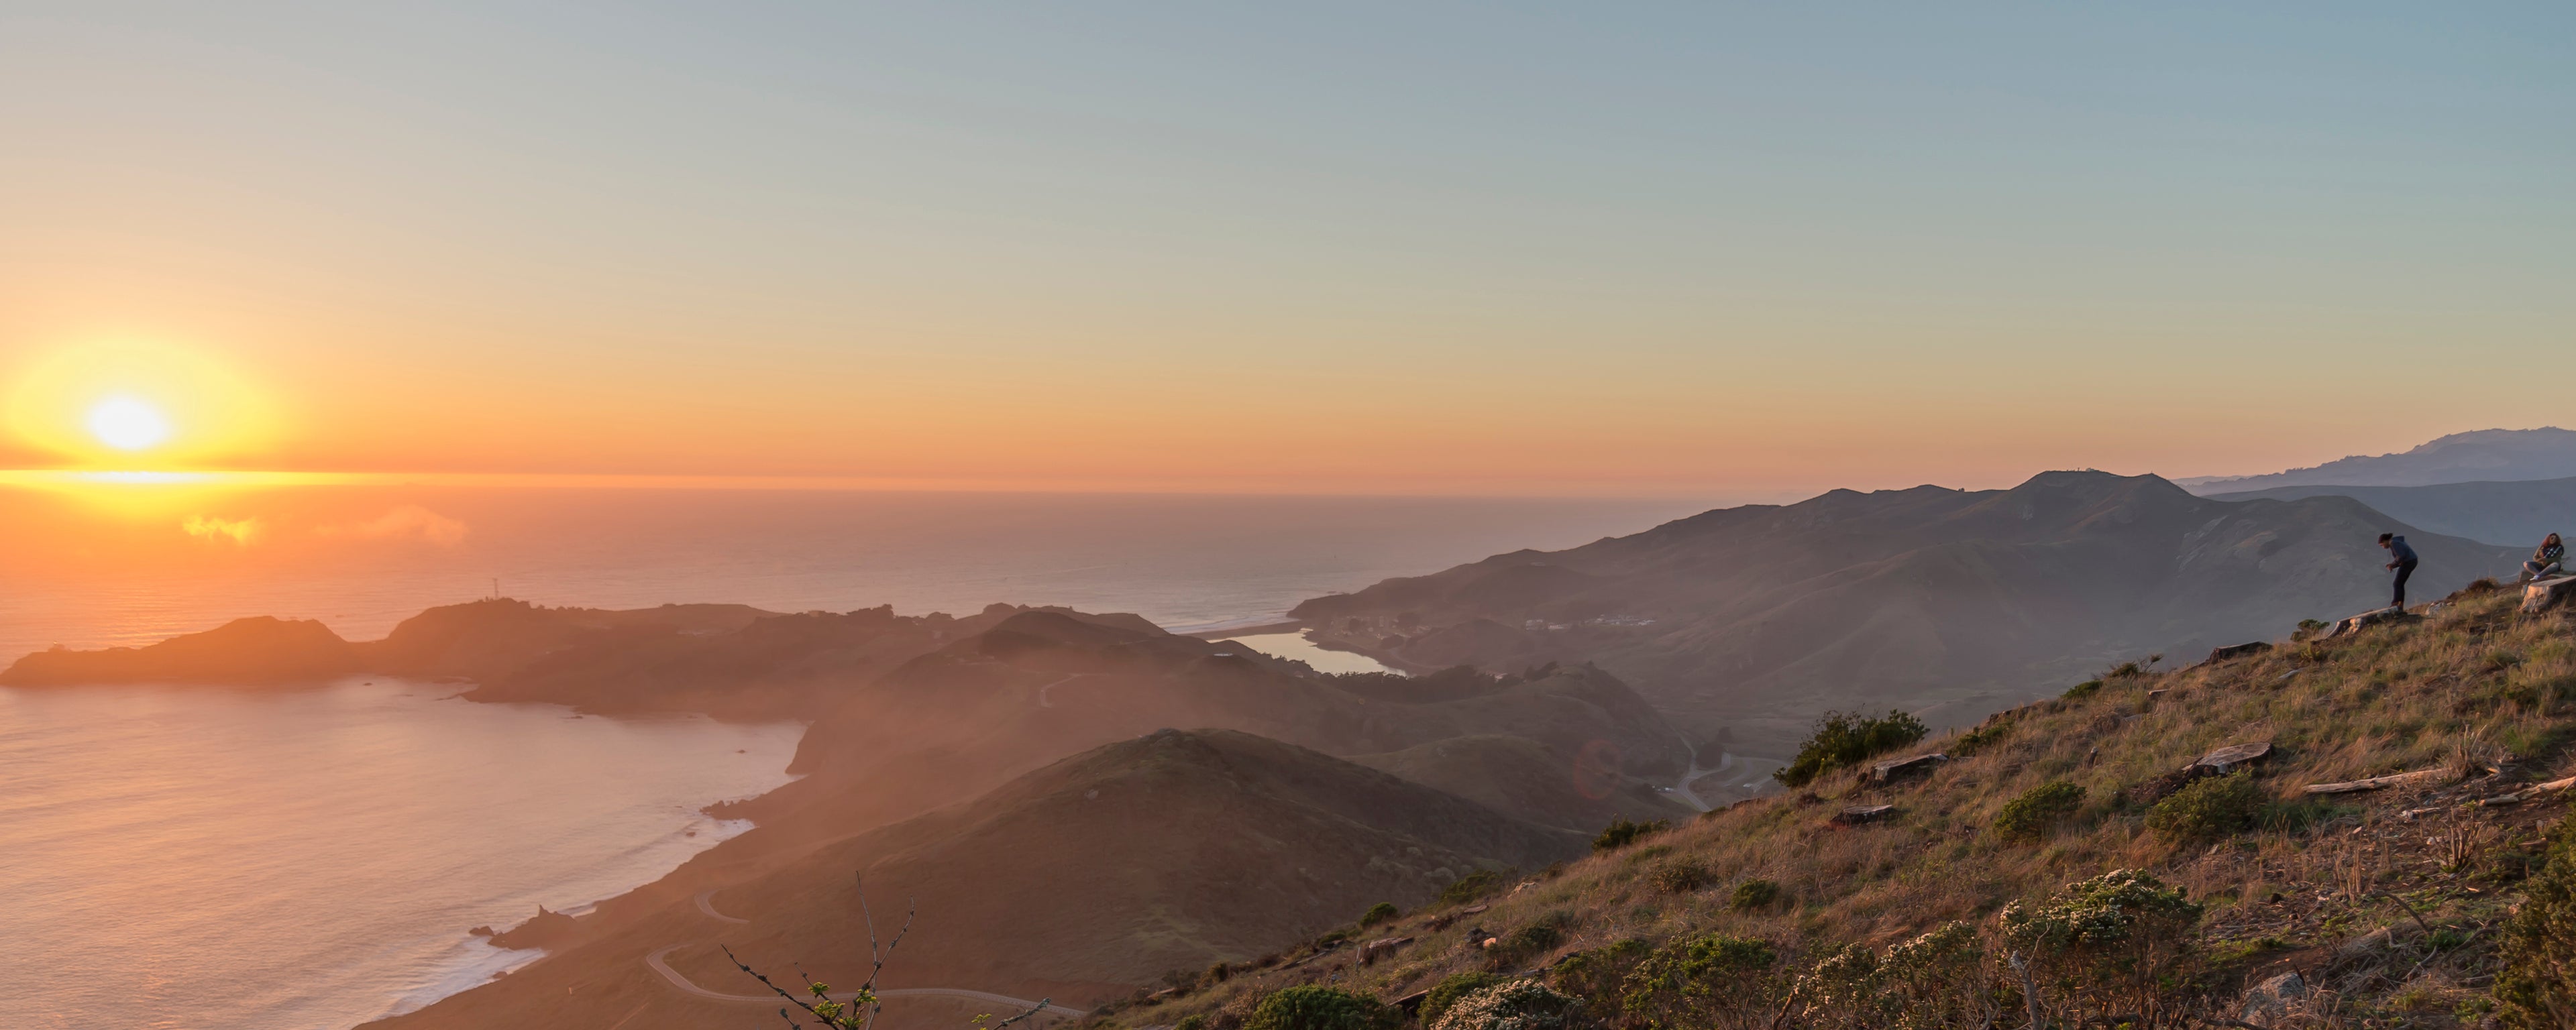 The sun sets over Rodeo Lagoon in the Marin Headlands, just north of San Francisco. The scene is illuminated by a warm glow.